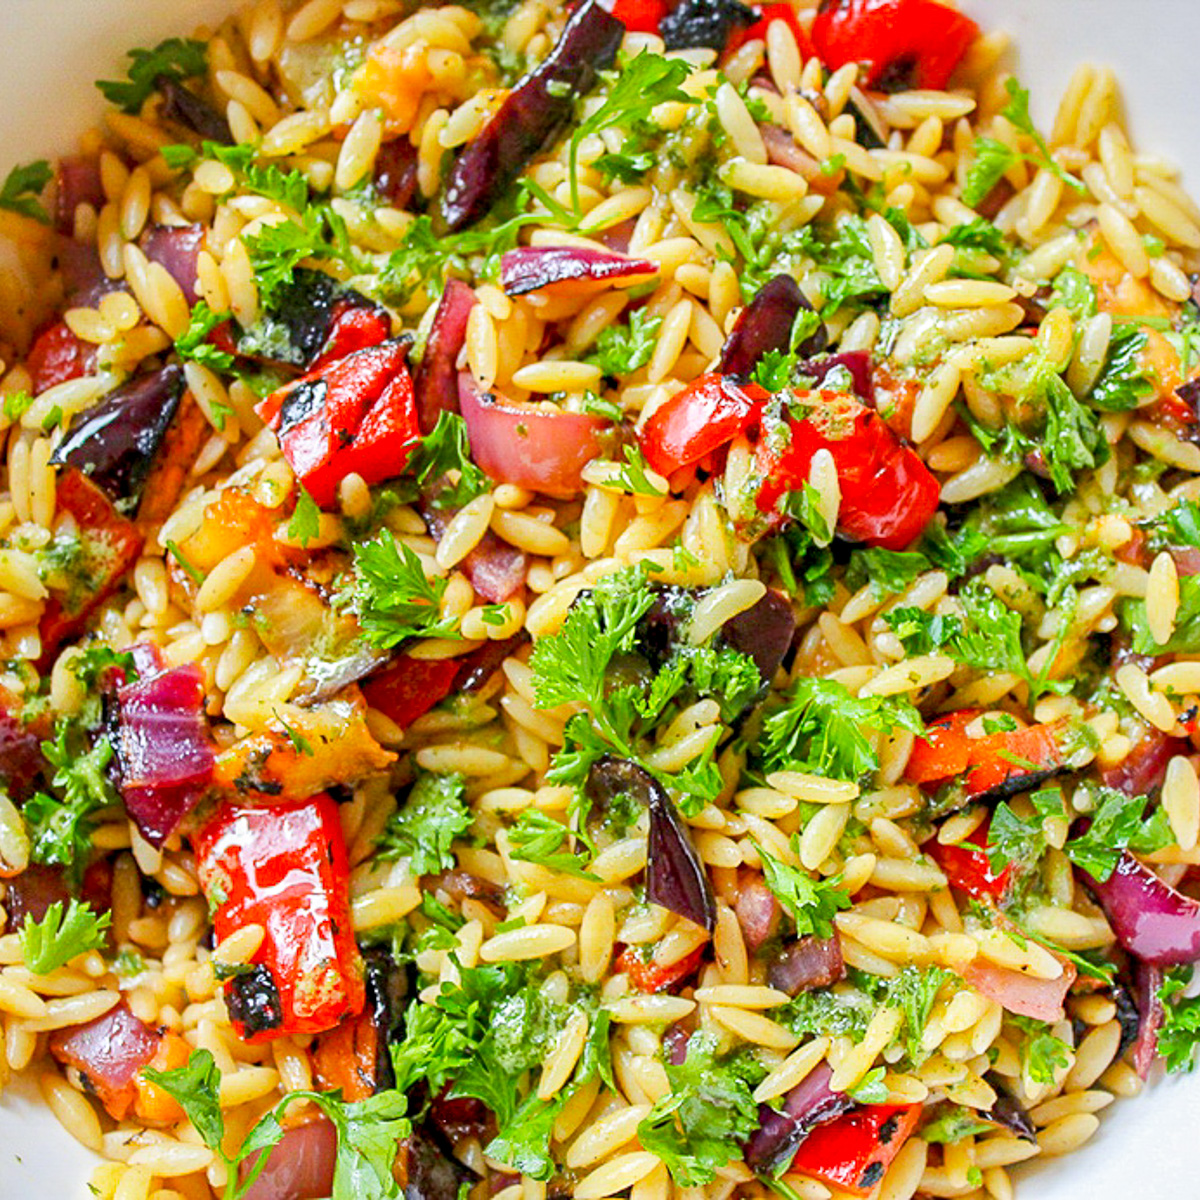 orzo pasta salad with grilled veggies in bowl